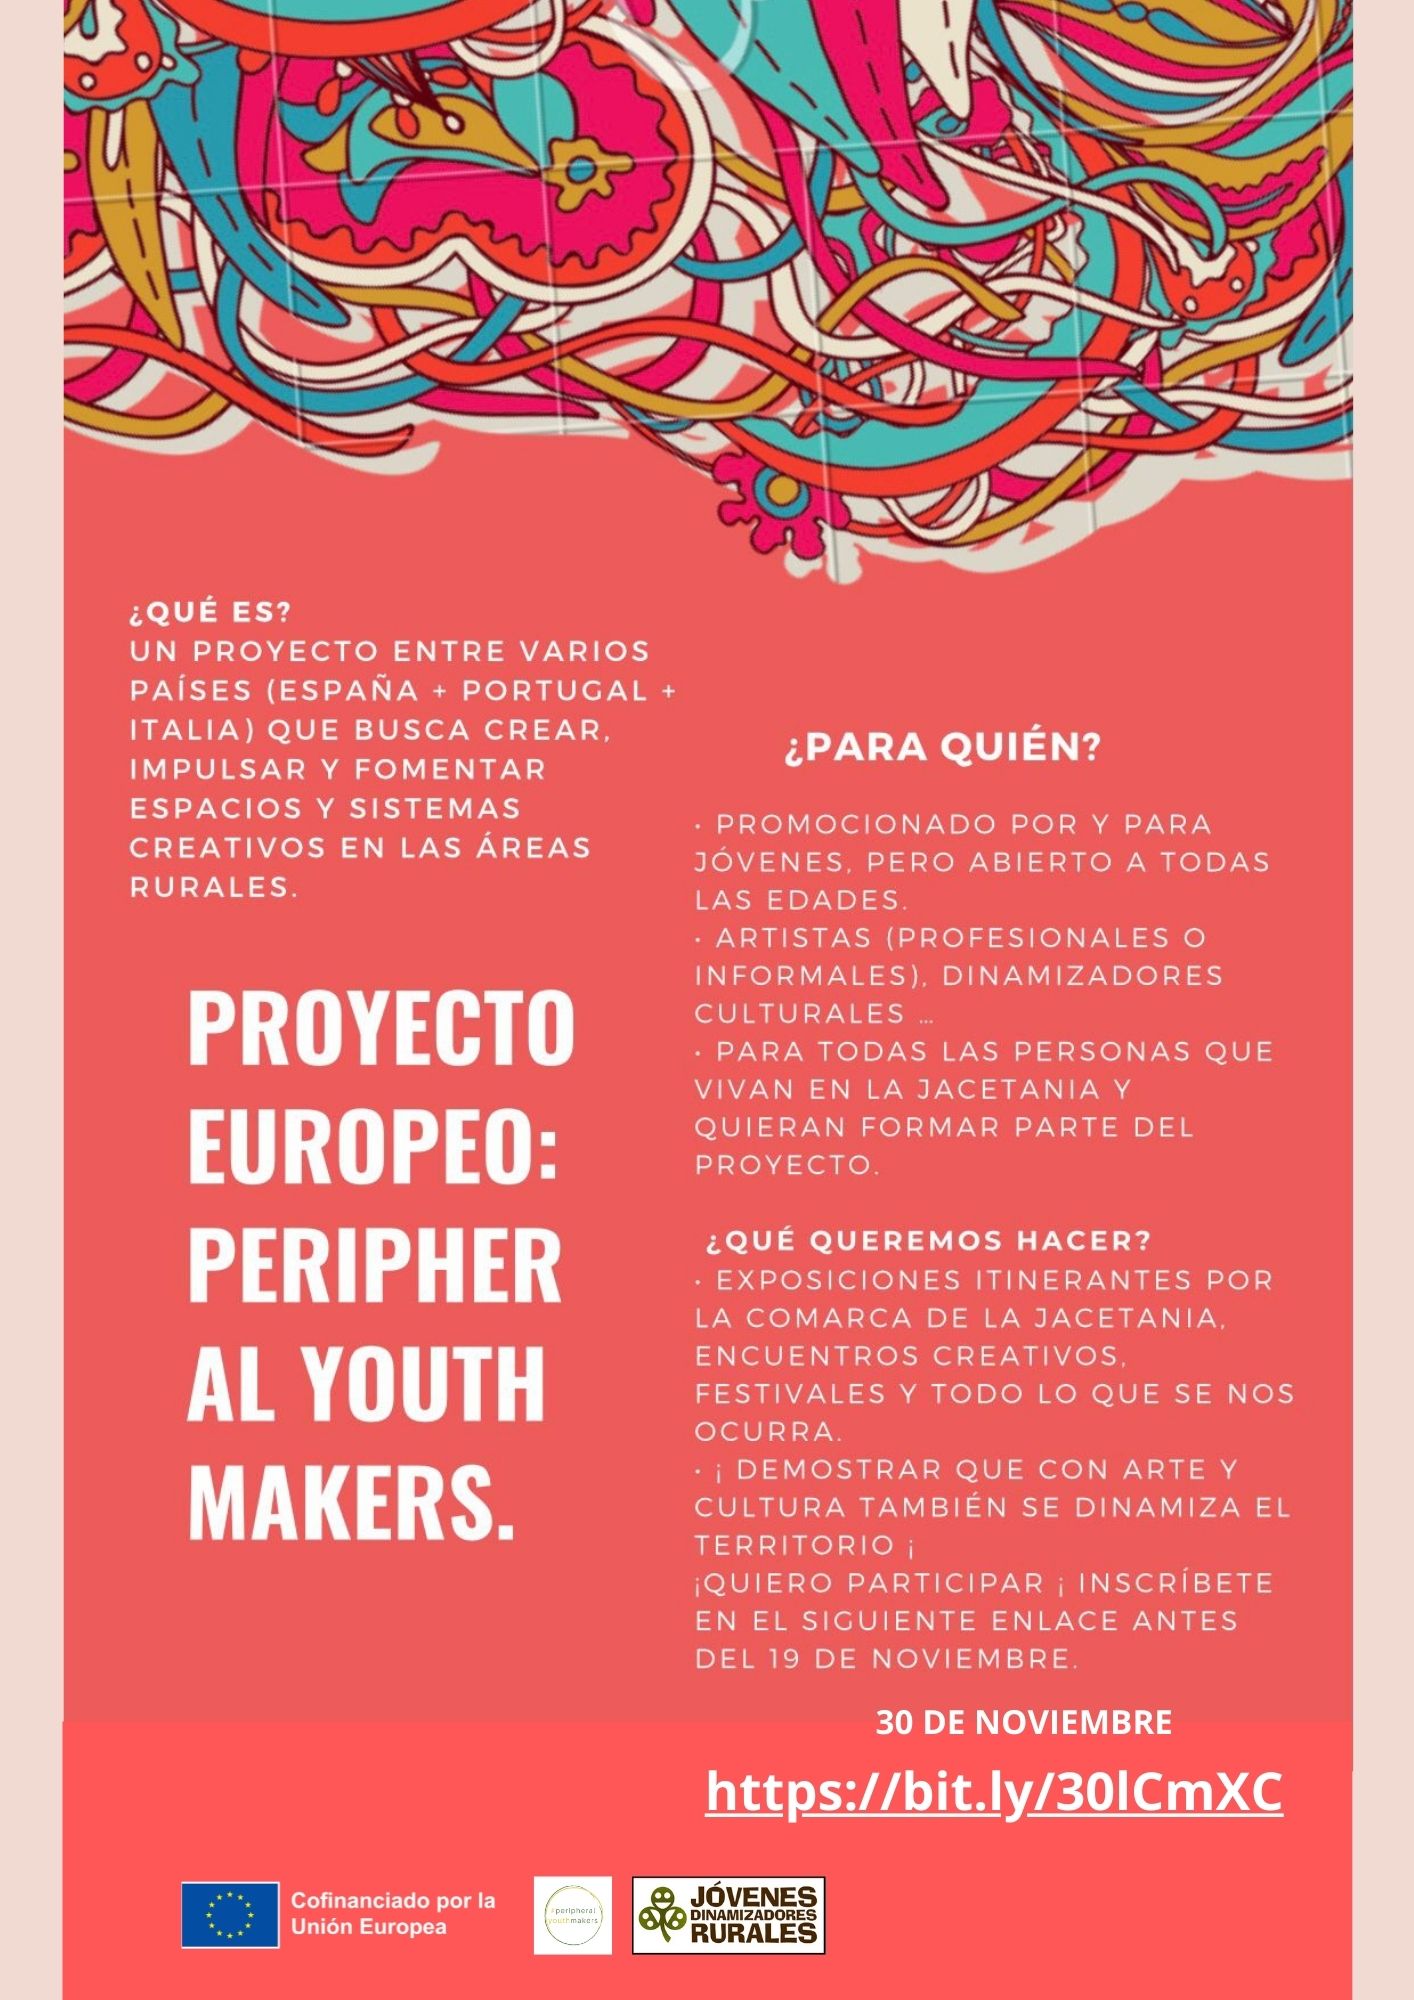 Proyecto Europeo Peripherial Youth Makers